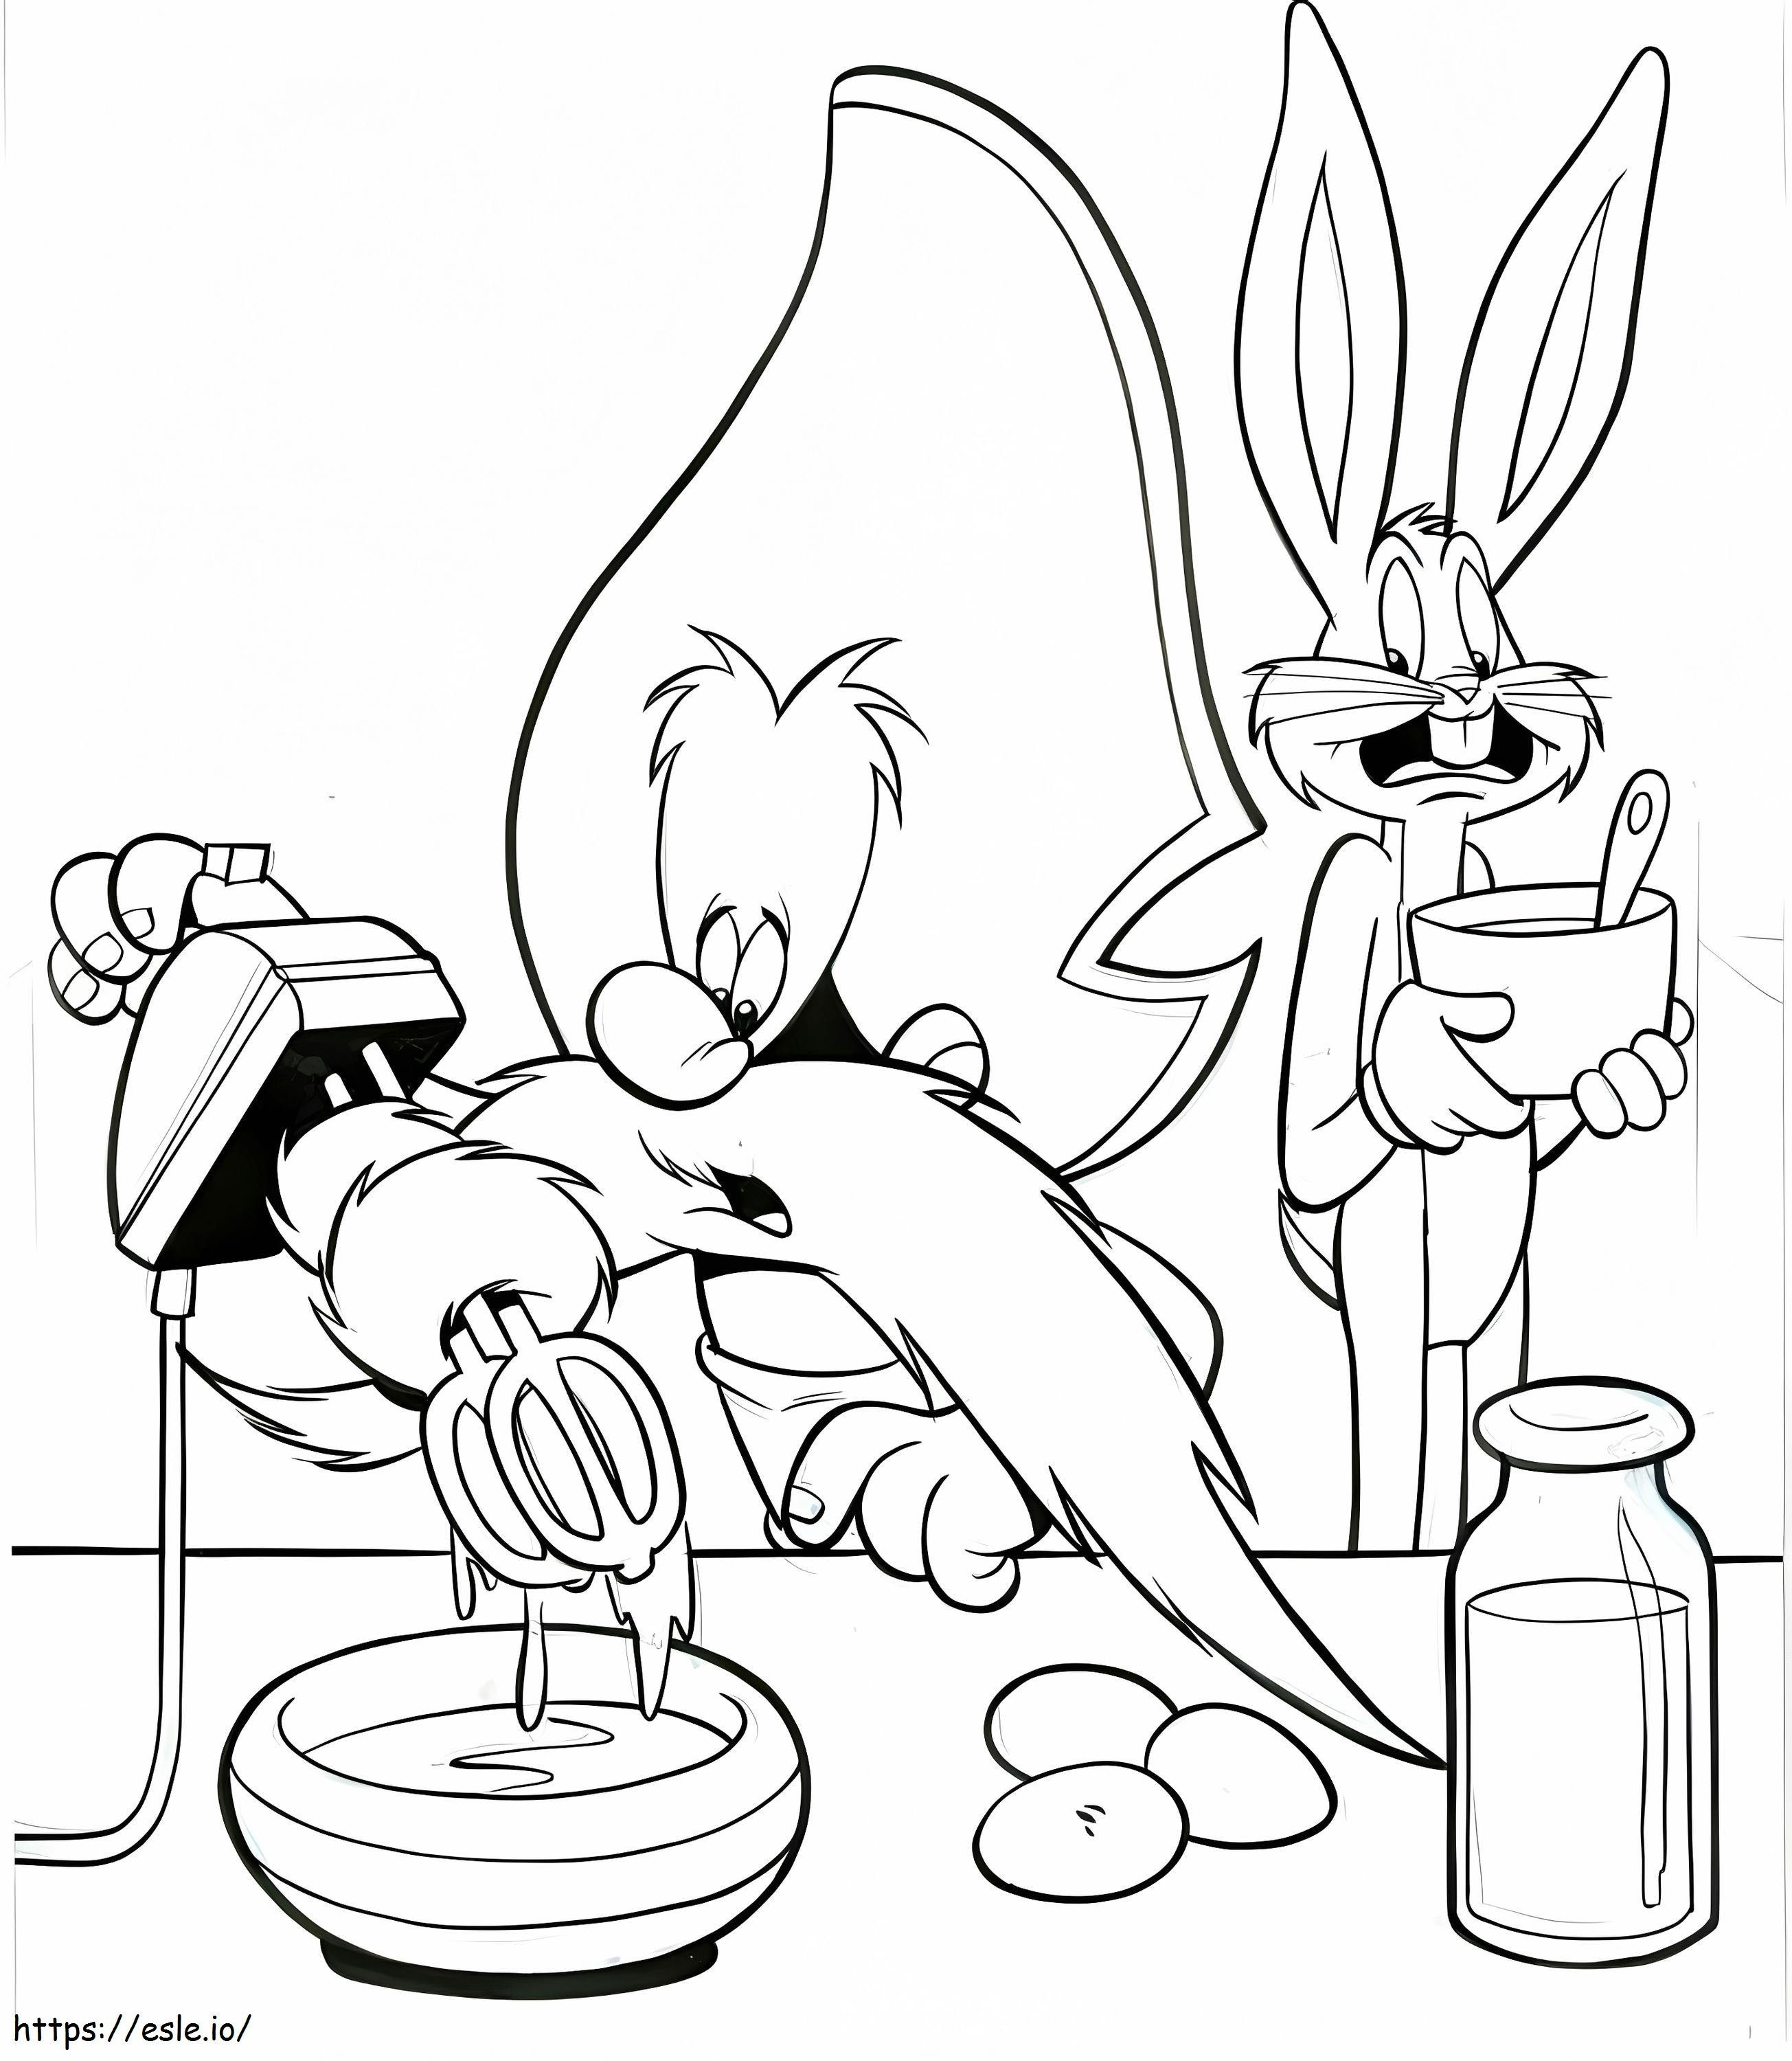 Bugs Bunny And Yosemite Sam coloring page